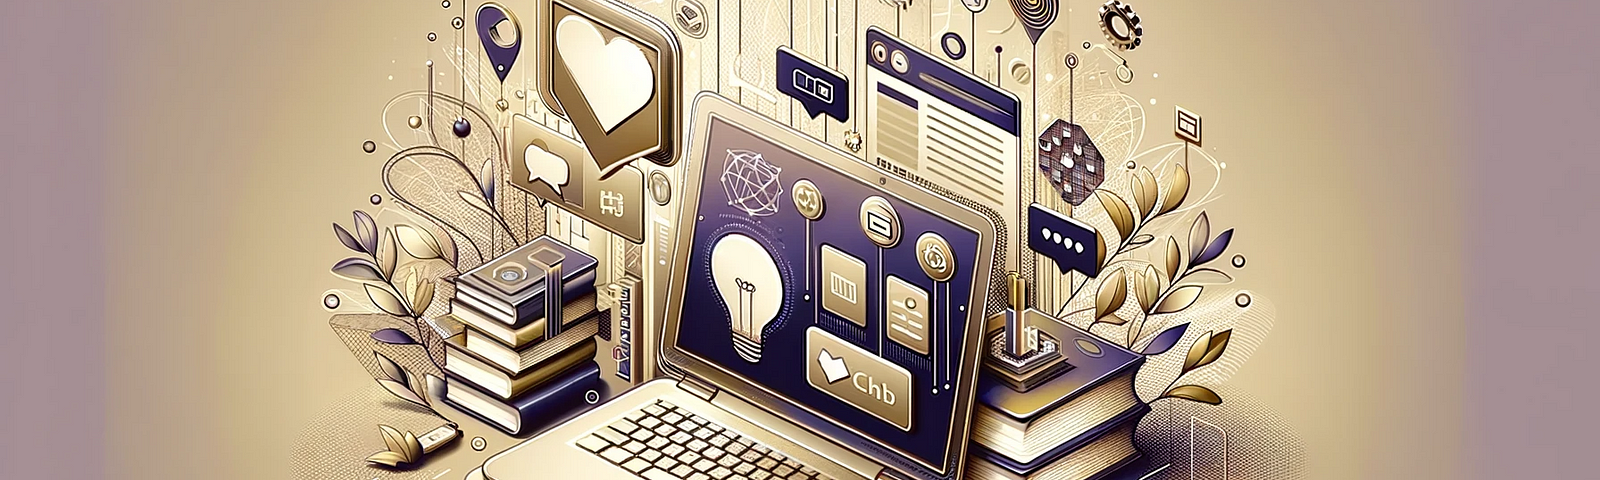 A digital artwork featuring a laptop displaying Medium’s interface, surrounded by symbols of writing, research, and online engagement, in a color palette of light beige, light golden, and dark violet